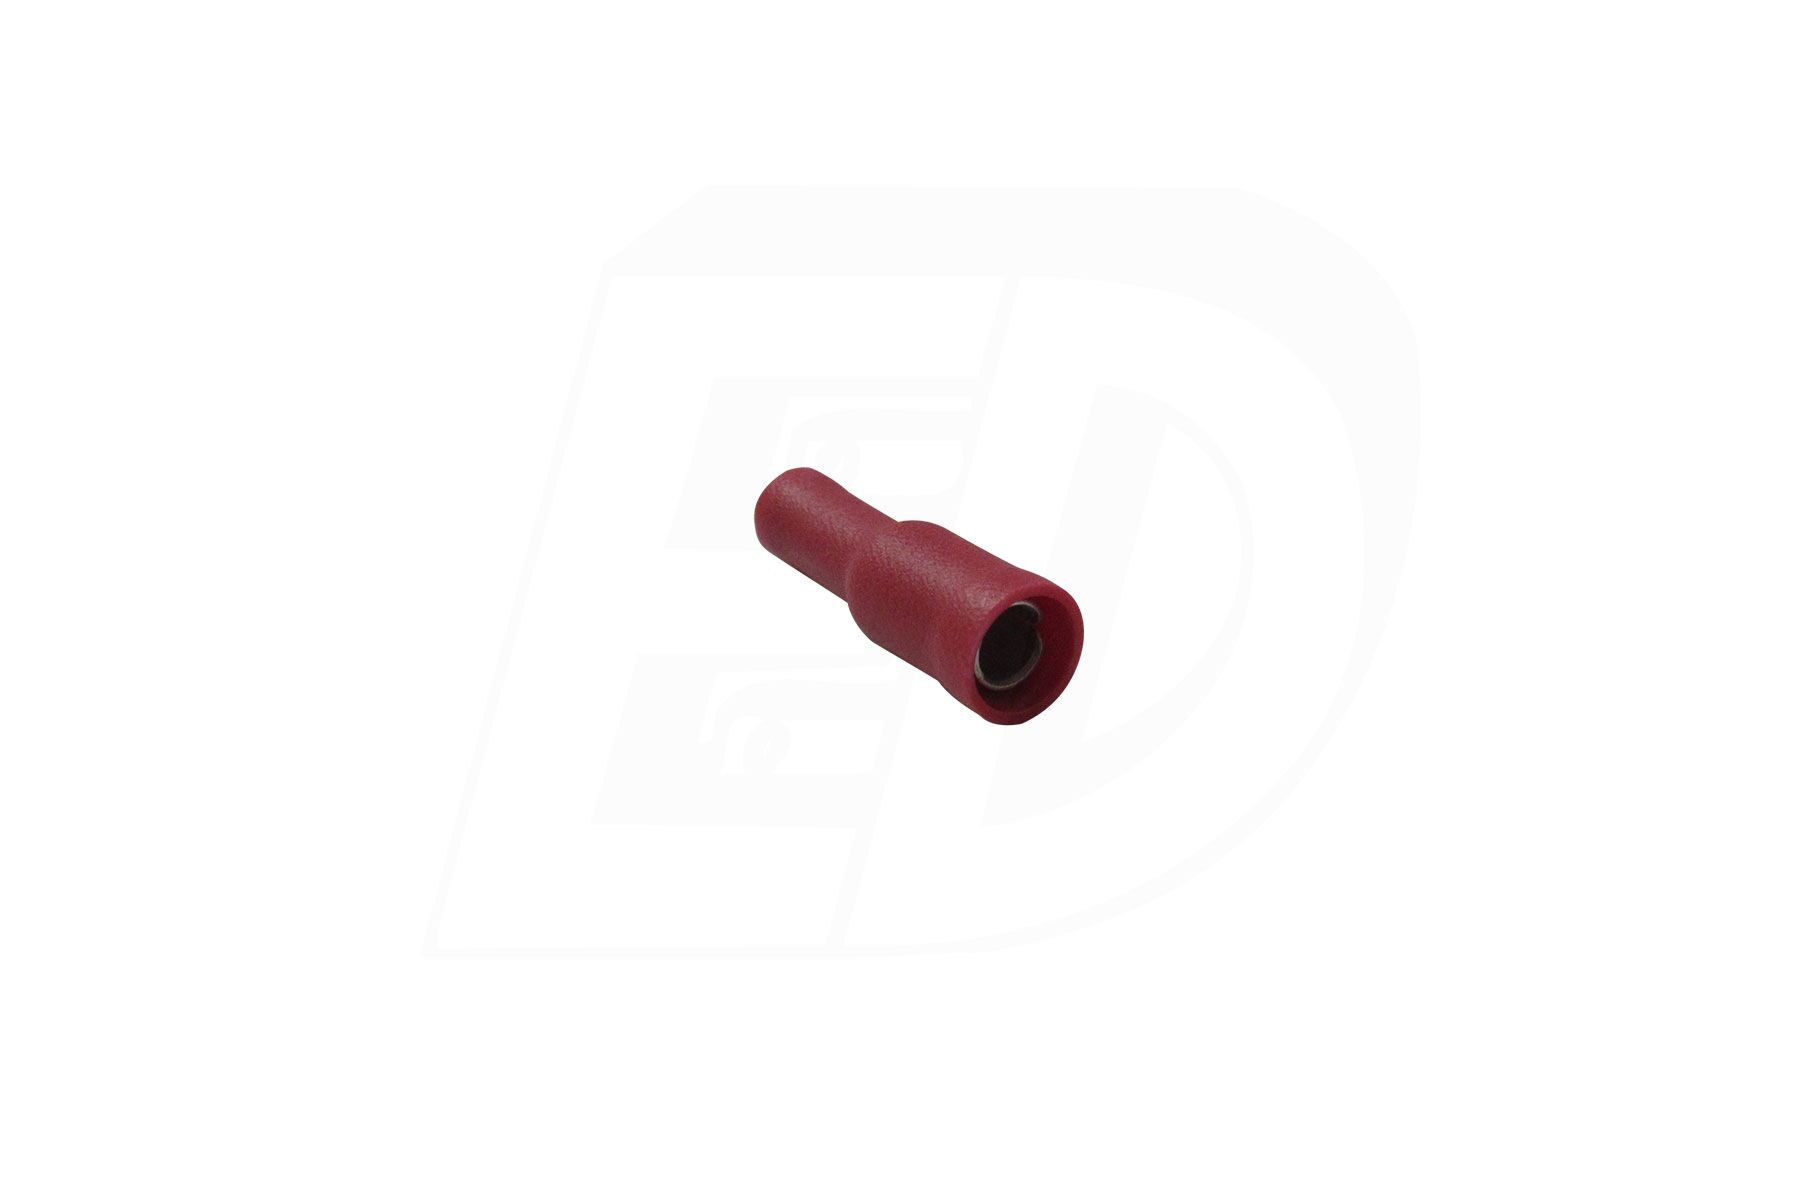 Butted Seam Vinyl Insulated Female Bullet Connectors 22 - 16 AWG